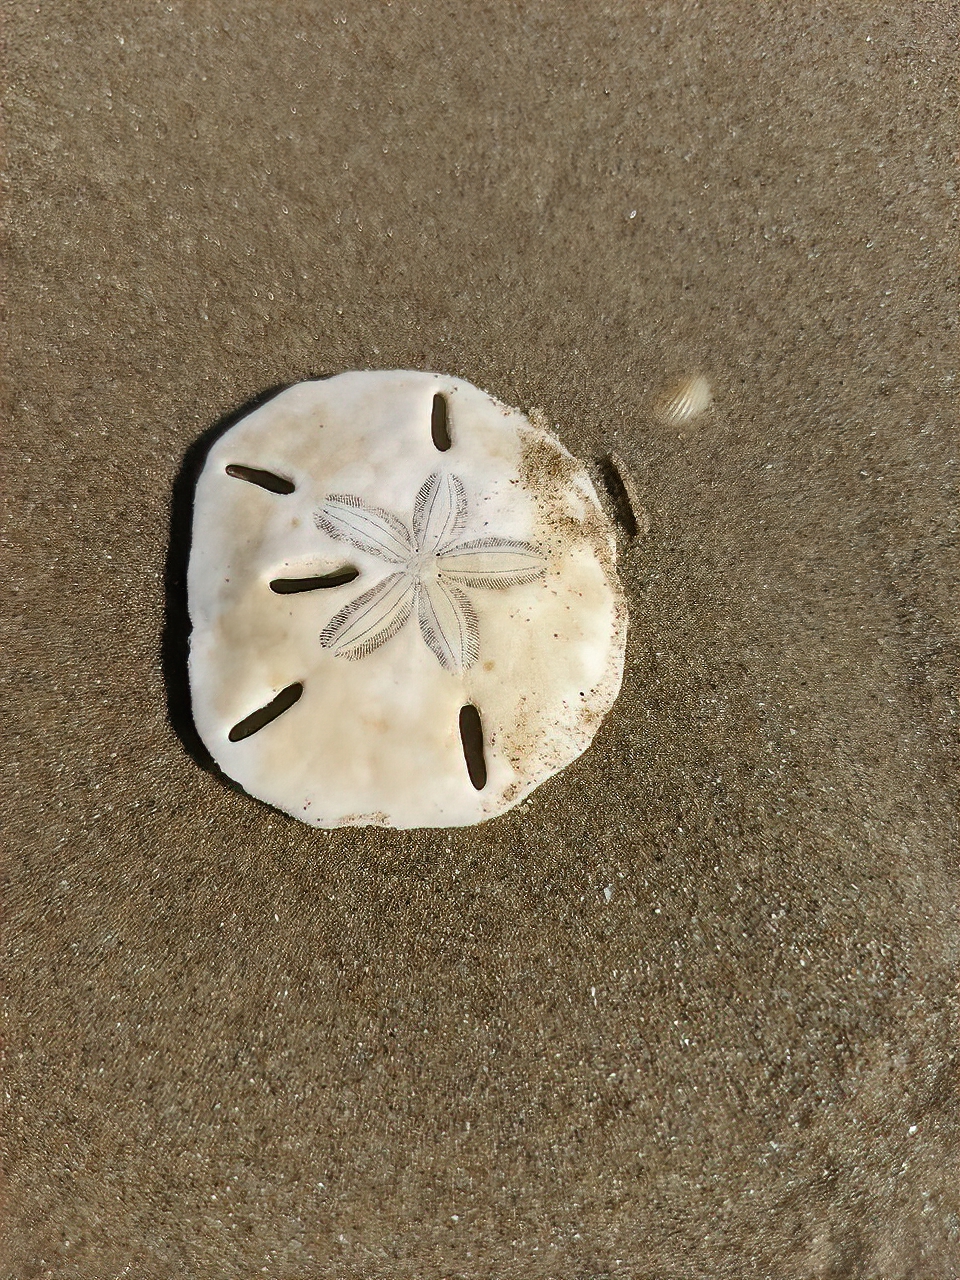 Our Local Sand Dollar – Rio Grande Valley Chapter Texas Master Naturalist